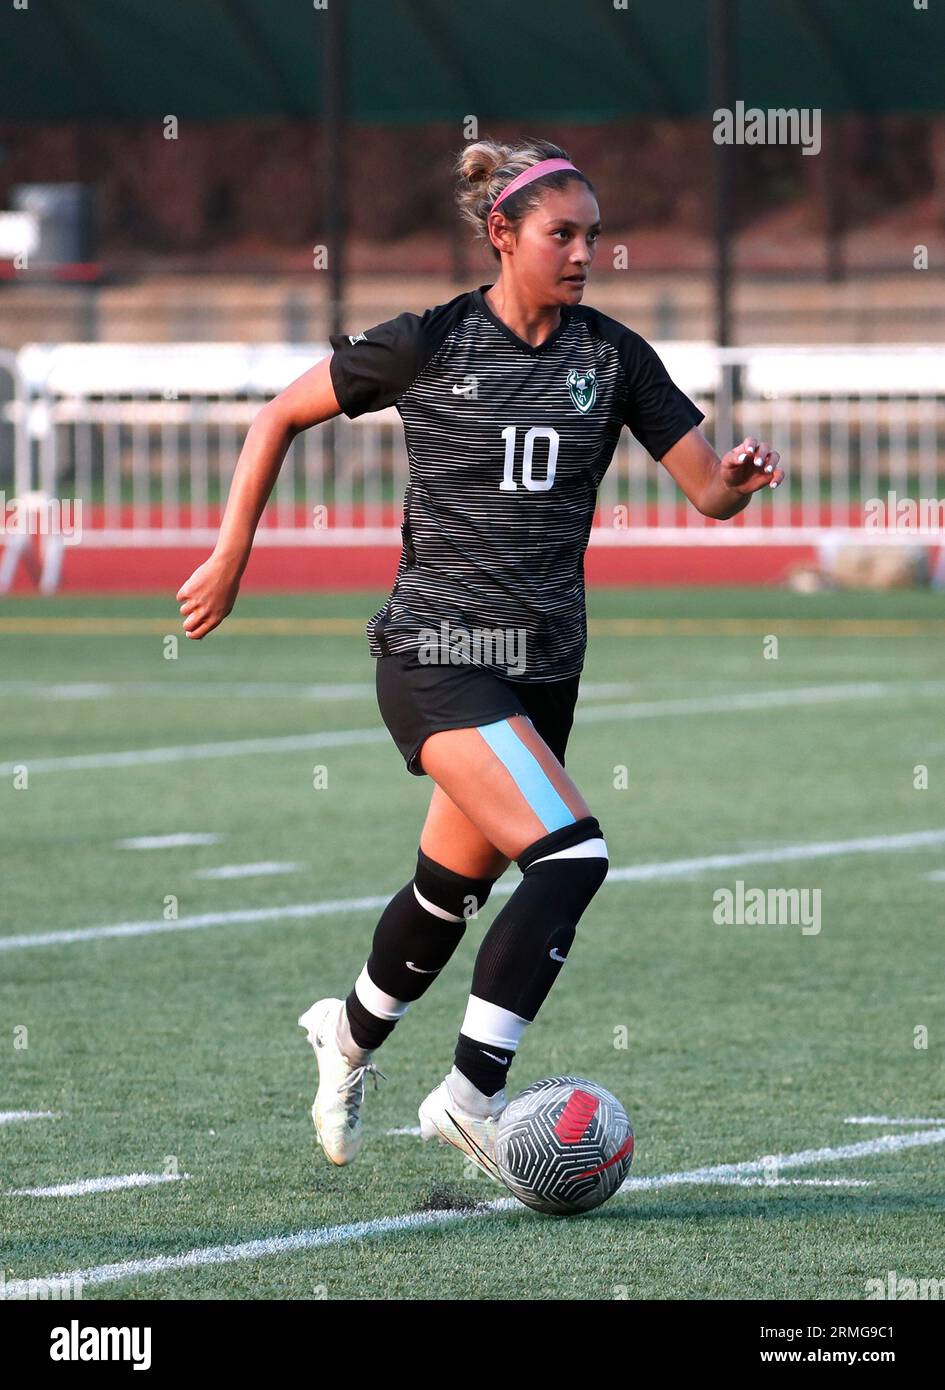 https://c8.alamy.com/comp/2RMG9C1/hillsboro-usa-27th-aug-2023-august-27-2023-portland-state-defender-hailey-green-10-dribbles-the-ball-upfield-during-the-first-half-of-the-ncaa-womens-soccer-match-between-the-portland-state-vikings-and-the-pacific-university-boxers-at-hillsboro-stadium-hillsboro-or-larry-c-lawsoncsmsipa-usa-credit-image-larry-c-lawsoncal-sport-mediasipa-usa-credit-sipa-usalamy-live-news-2RMG9C1.jpg